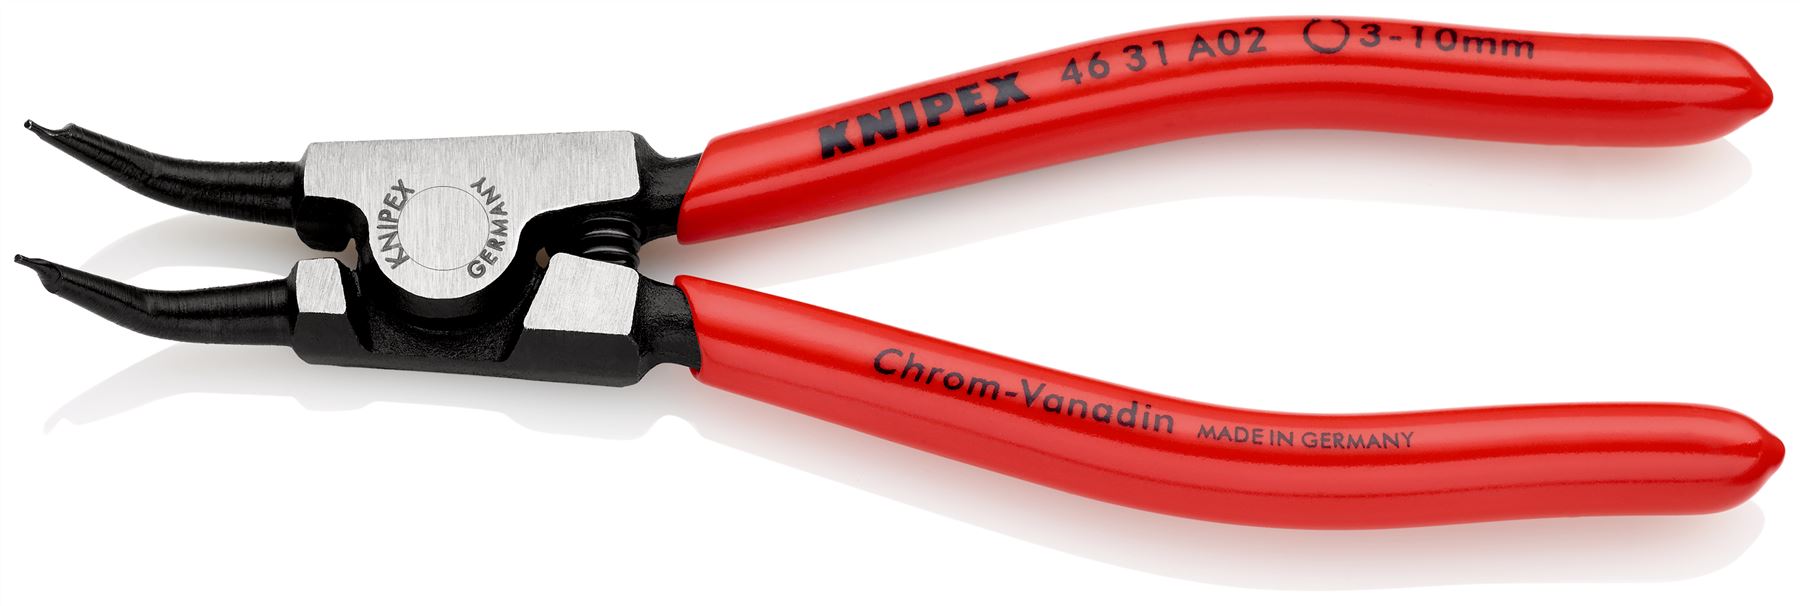 KNIPEX Circlip Pliers for External Circlips on Shafts 45° Angled 130mm 0.9mm Diameter Tips 46 31 A02